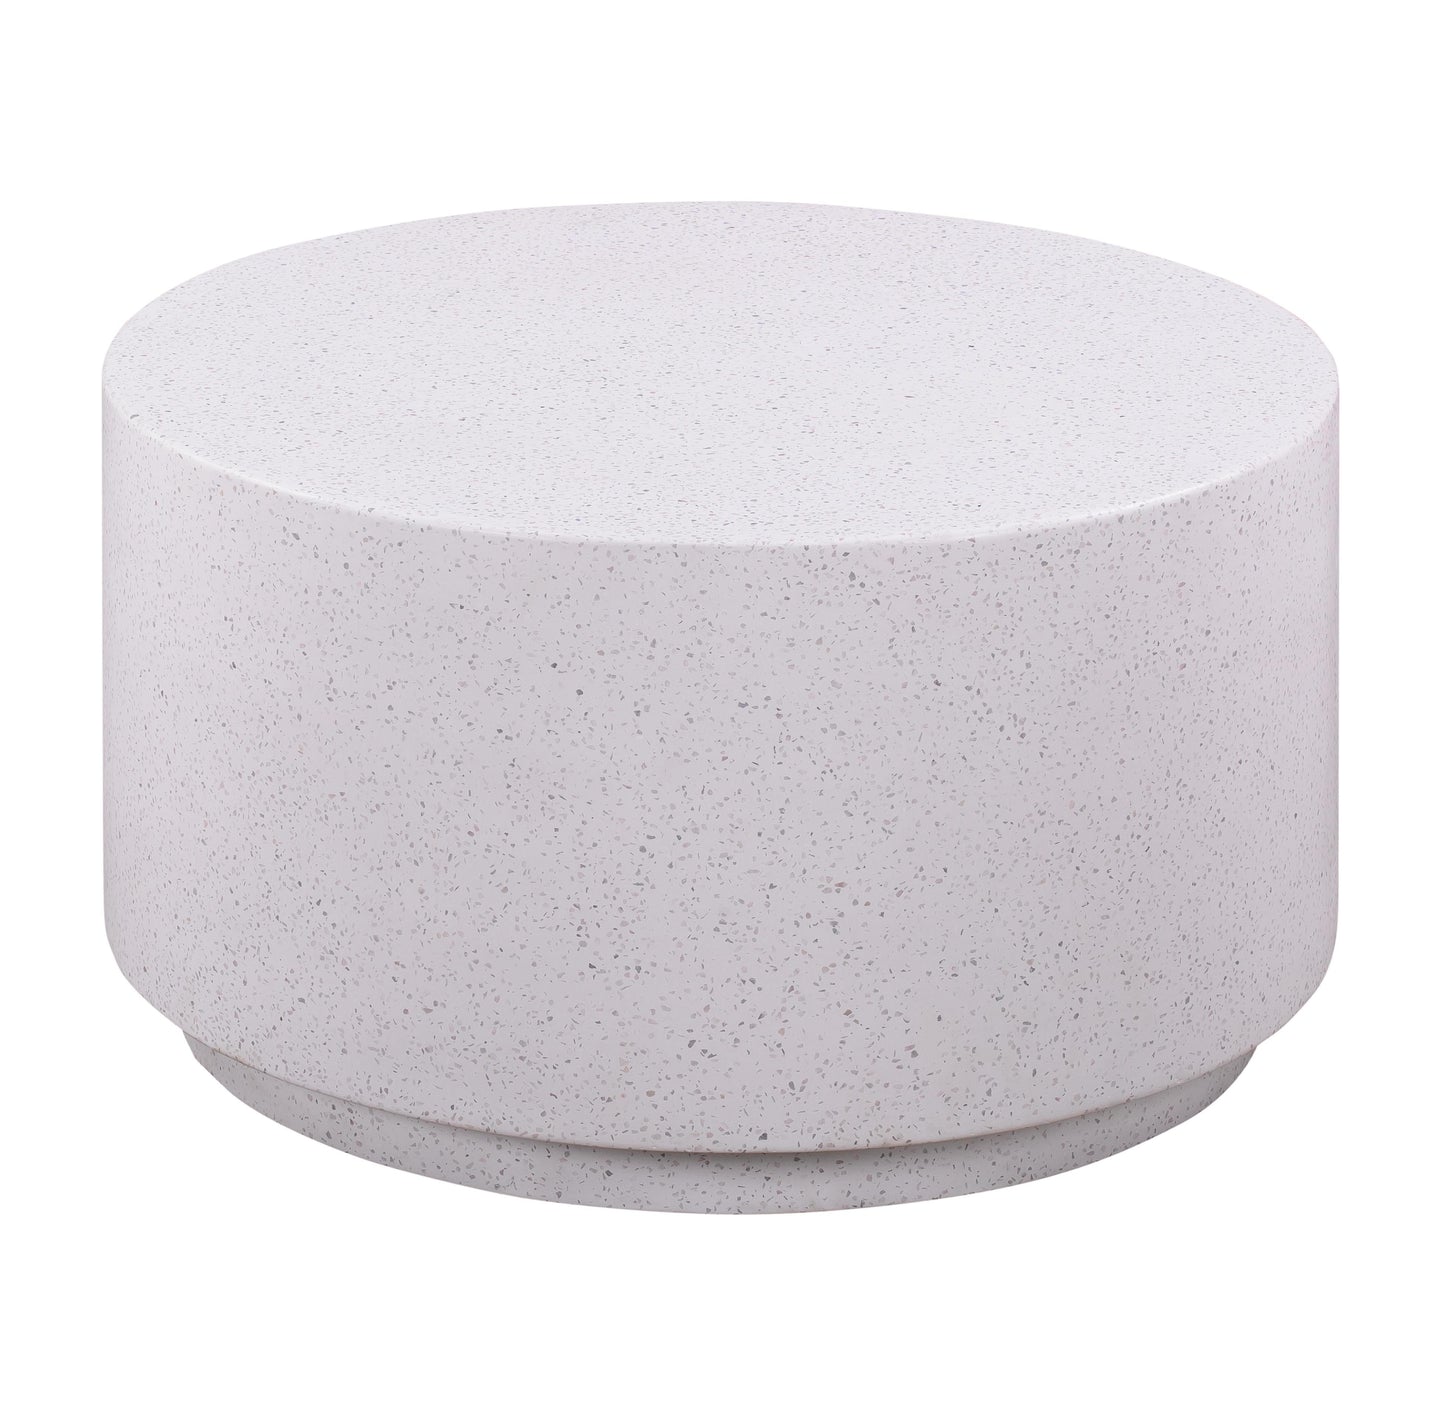 Terrazzo Light Speckled Coffee Table by TOV